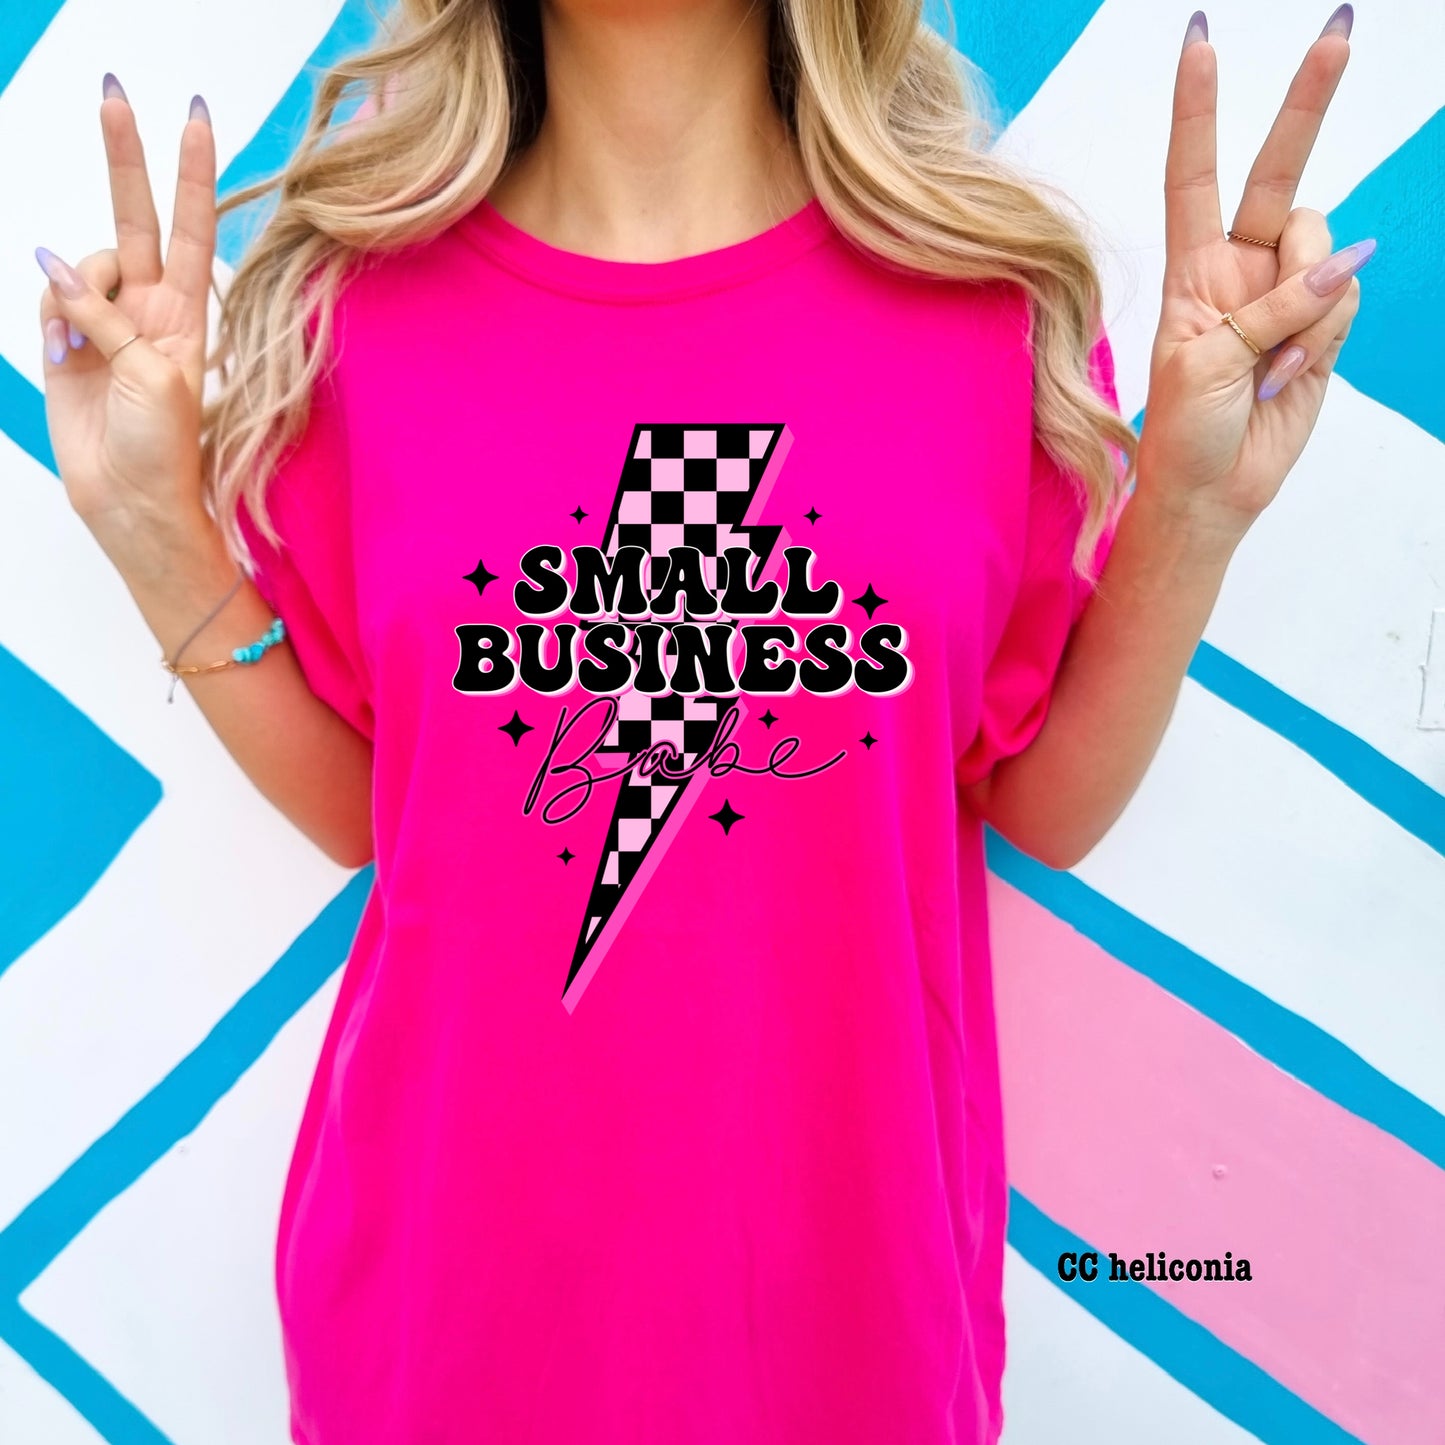 Small Business Babe bolt screen print transfer